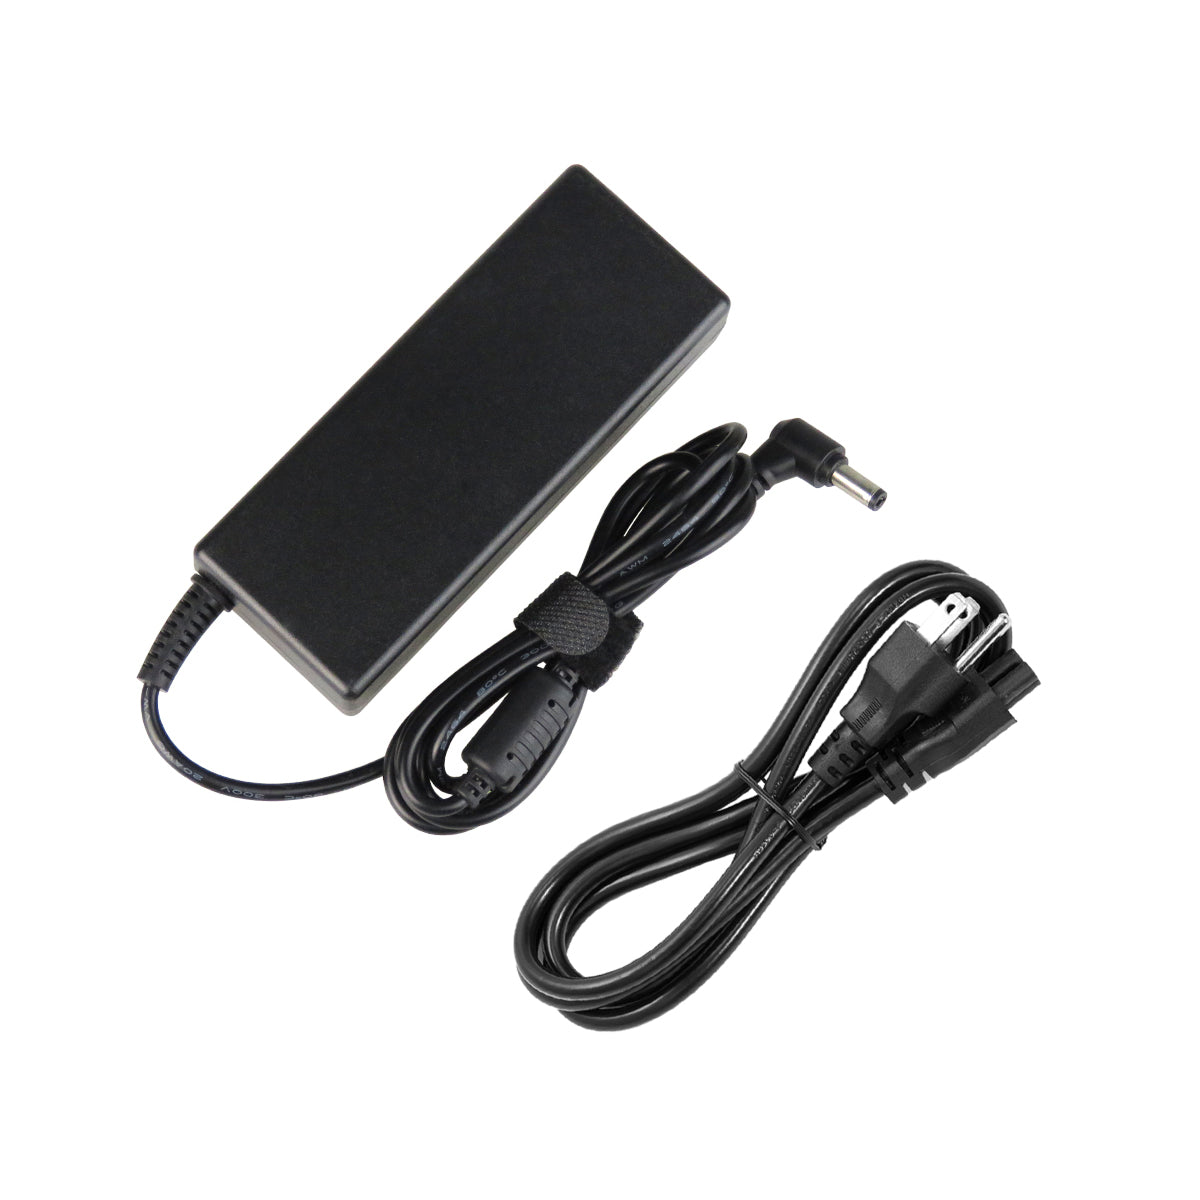 AC Adapter Charger for Lenovo IdeaPad Y650 Notebook.